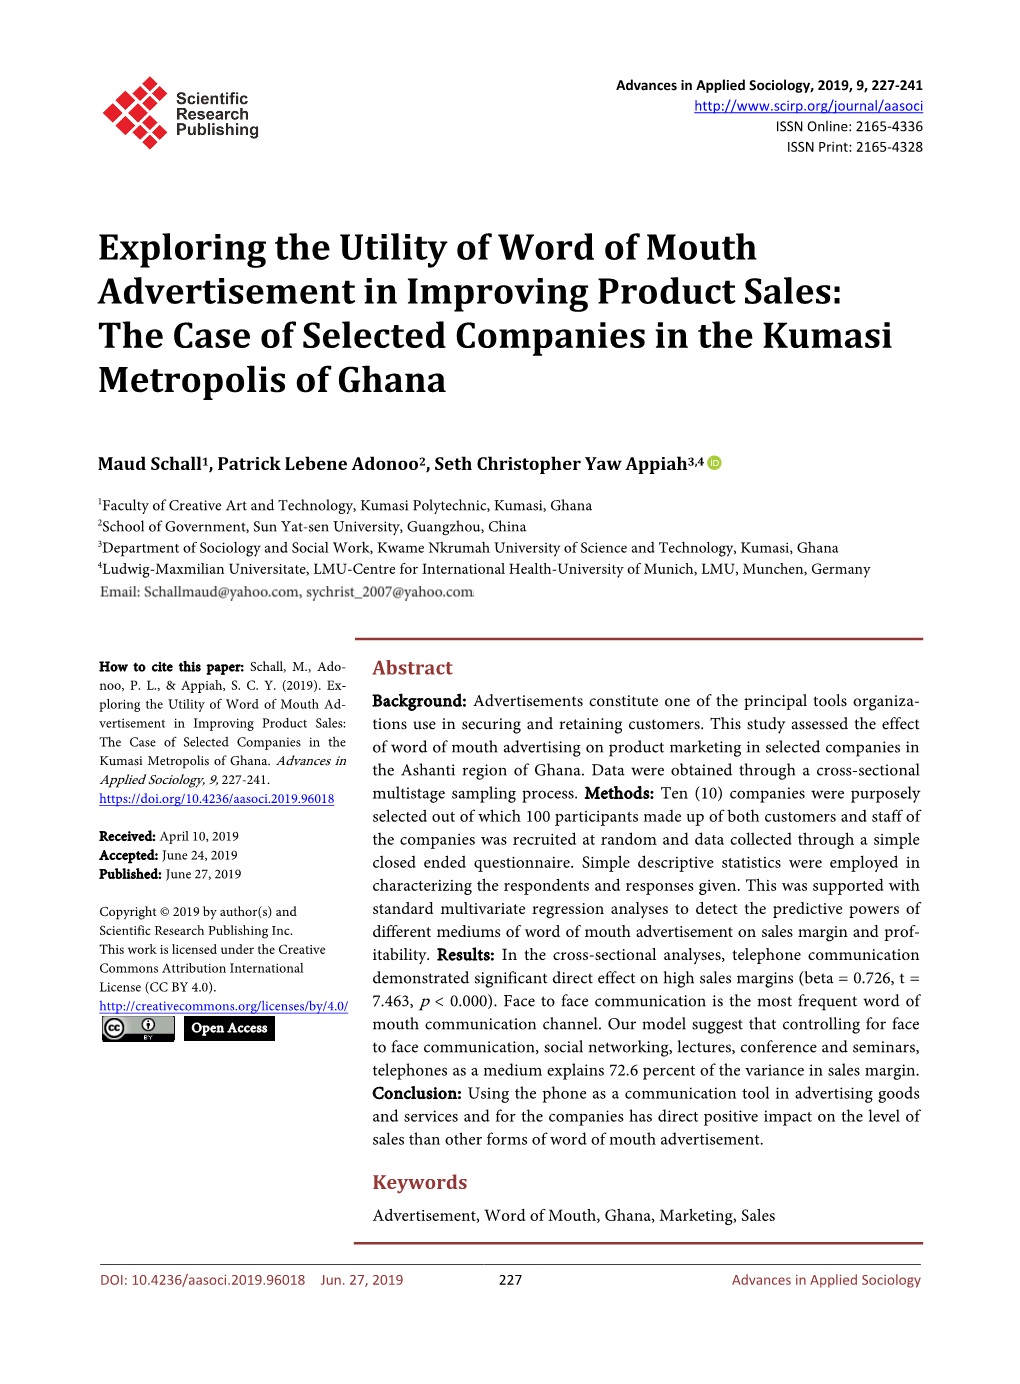 Exploring the Utility of Word of Mouth Advertisement in Improving Product Sales: the Case of Selected Companies in the Kumasi Metropolis of Ghana